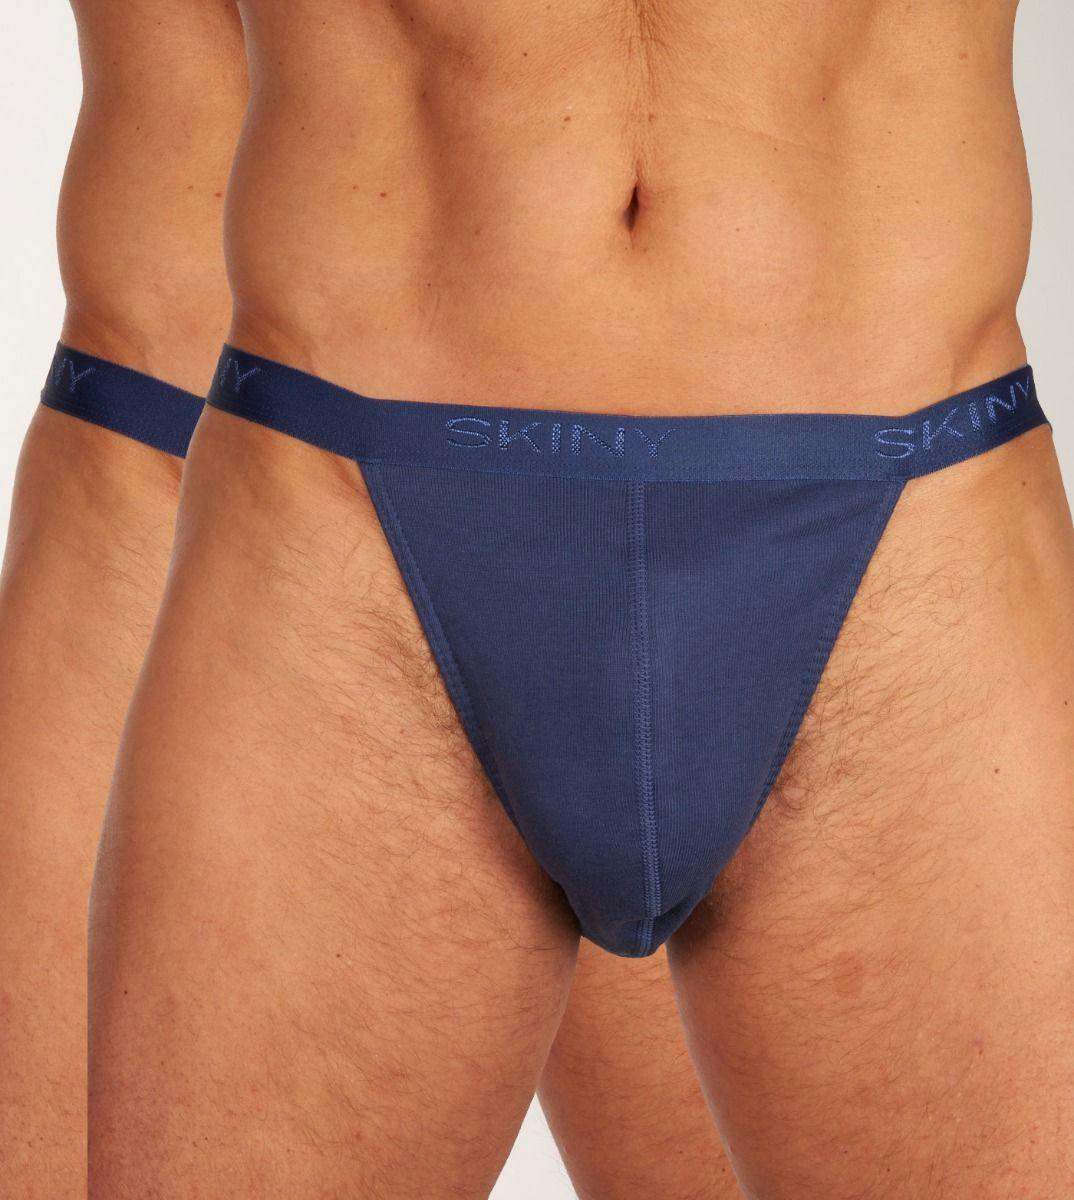 Storing leugenaar boot Skiny slip 2 pack Every Day In Cotton Rib Tanga Briefs H 080693-0369